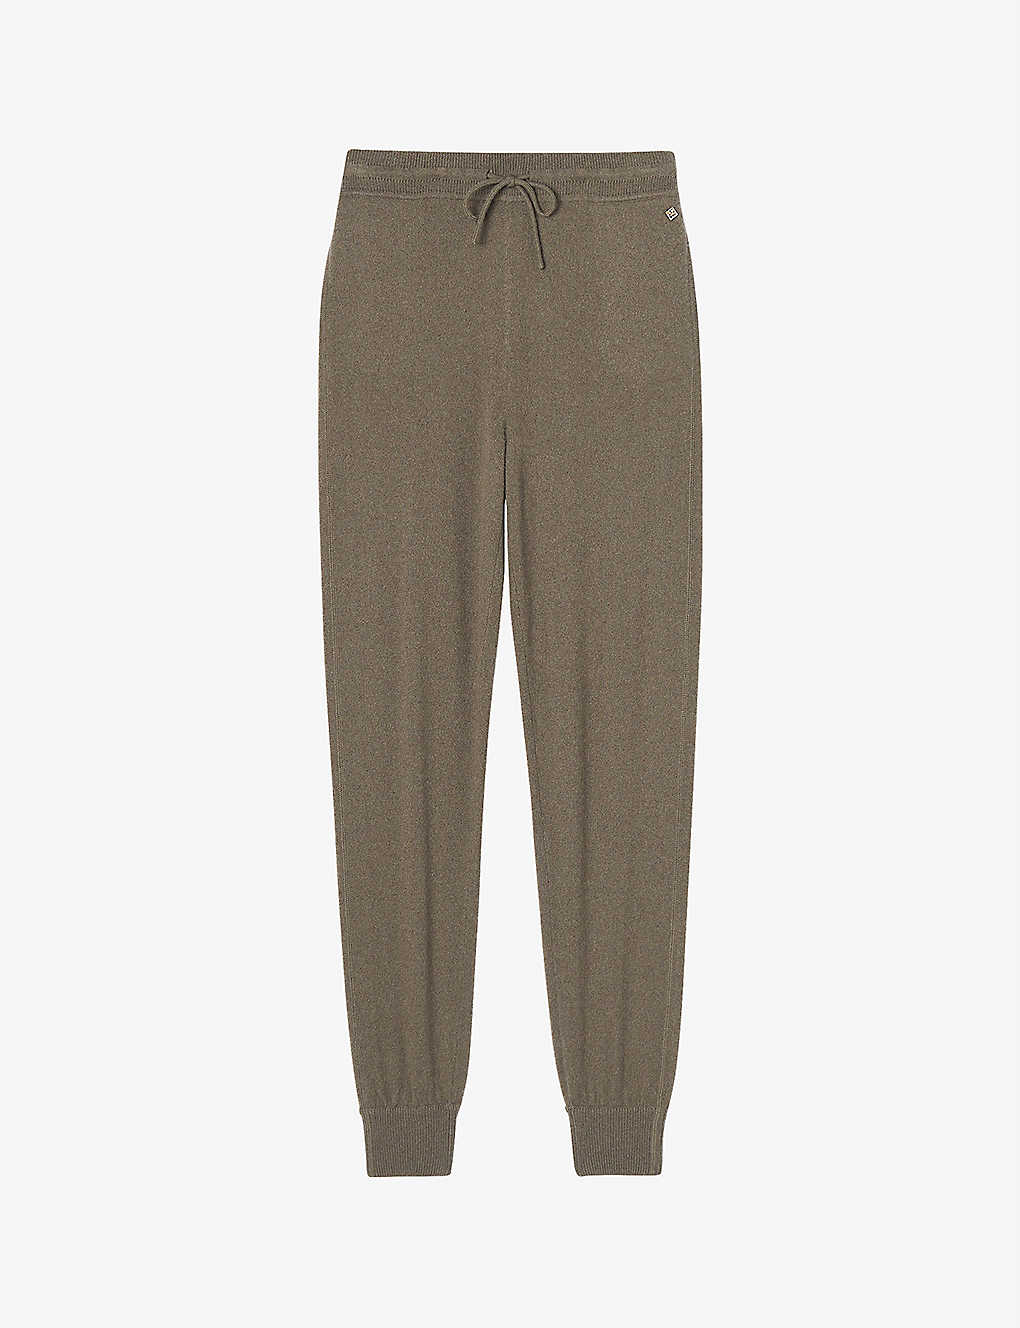 Mauro brand-print tapered cashmere jogging bottoms(9461698)